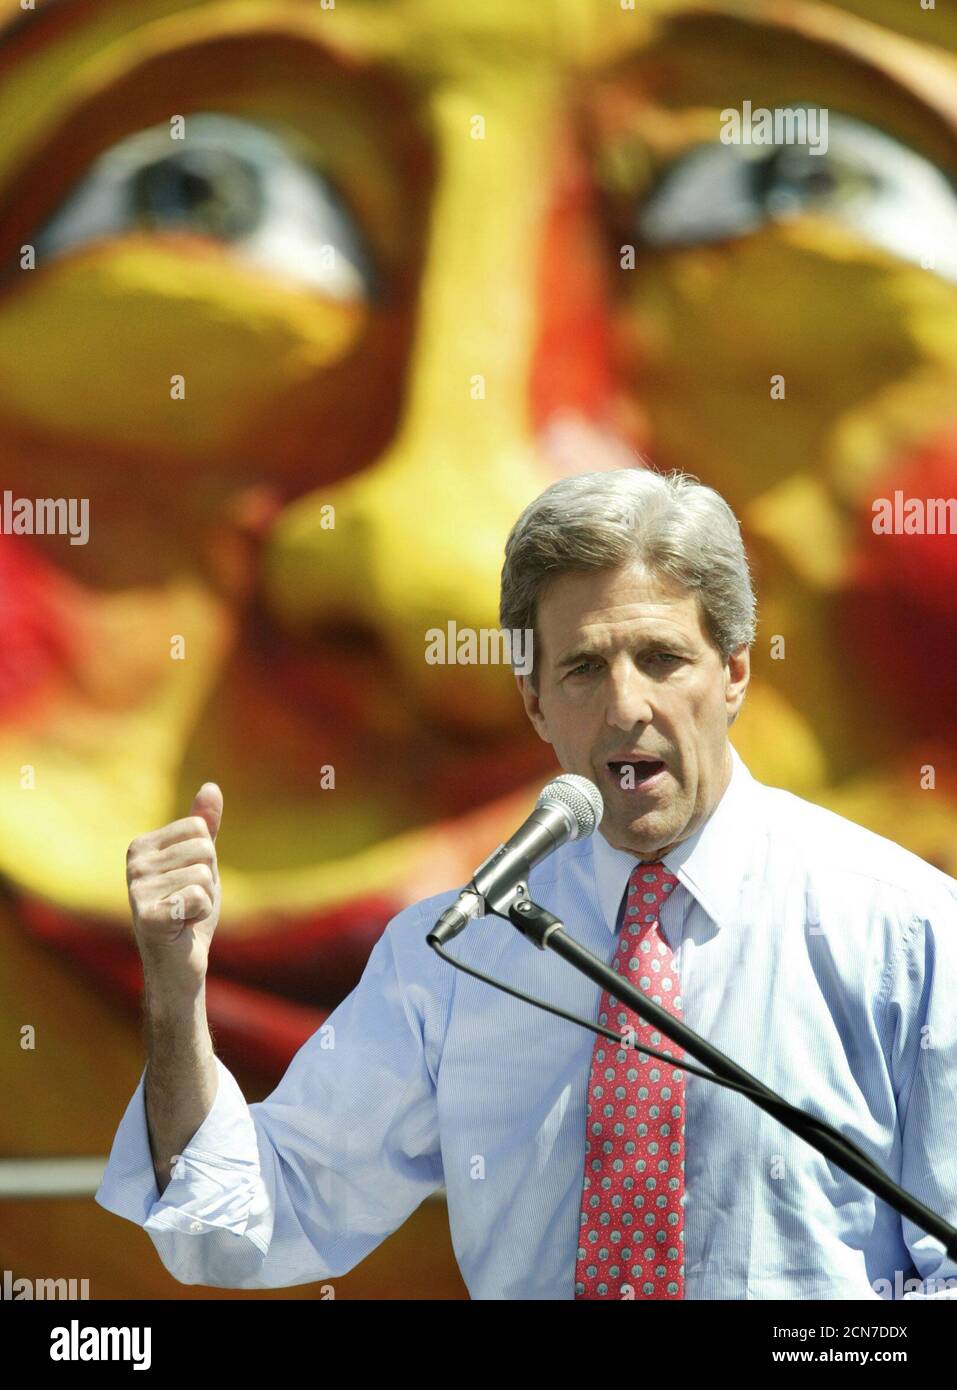 U.S. Democratic Presidential candidate John Kerry makes a campaign speaks to students at Woodrow Wilson High School in Los Angeles, May 5, 2004. Kerry, the presumptive Democratic presidential nominee, has vowed to take a tougher line than U.S. President George W. Bush against foreign exchange manipulation. Last week, he pledged 'a no-nonsense effort to stop illegal currency manipulation that's going in countries like China and Japan.' REUTERS/Lucy Nicholson US ELECTION  LN/GN Stock Photo